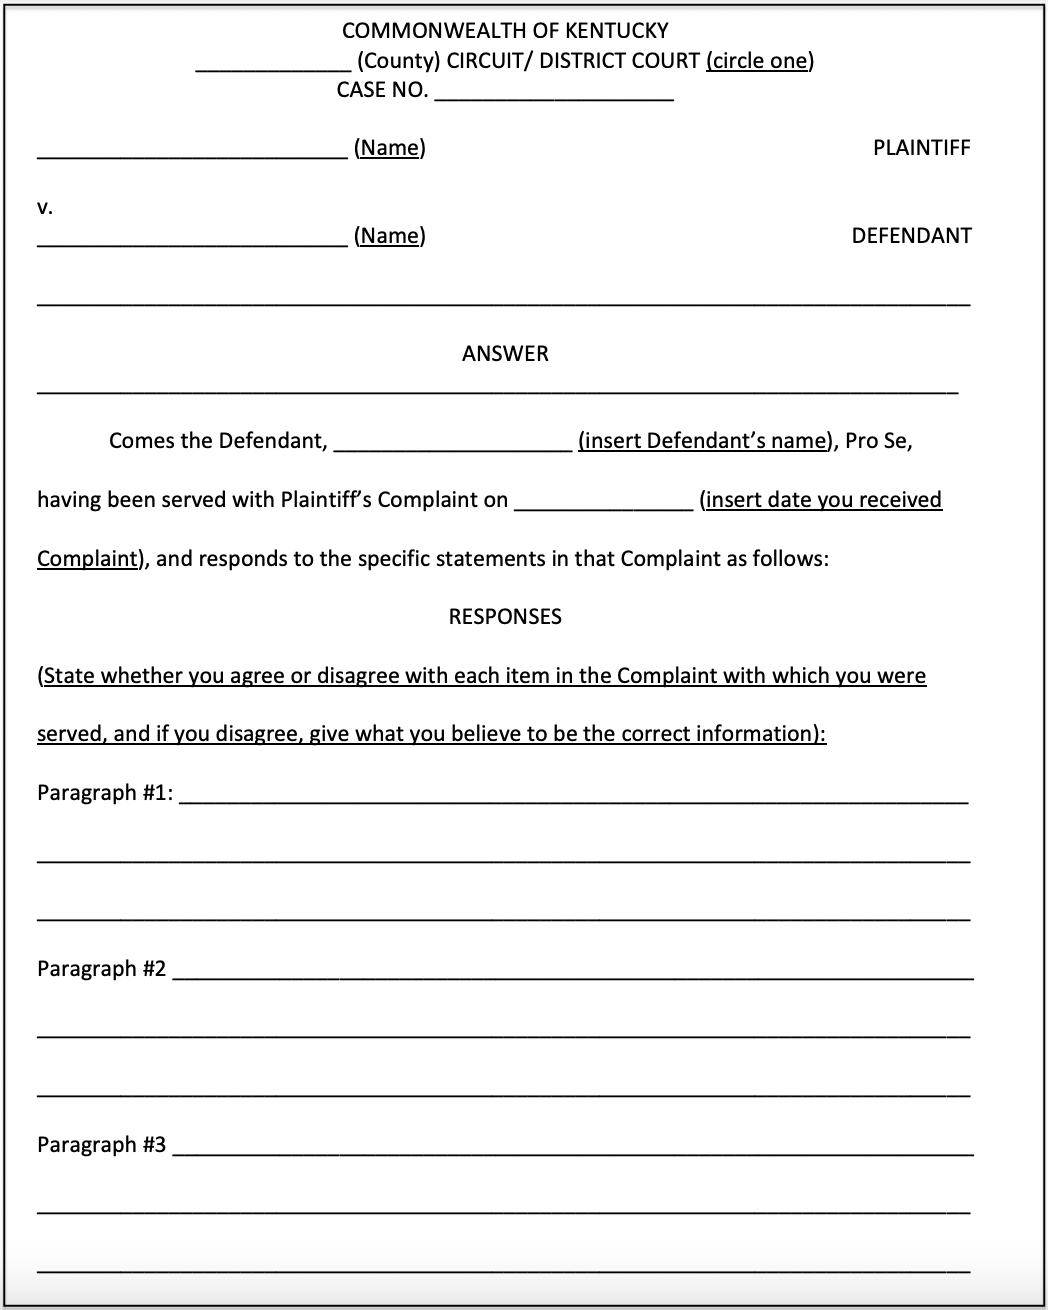 Image of a Kentucky Answer Form